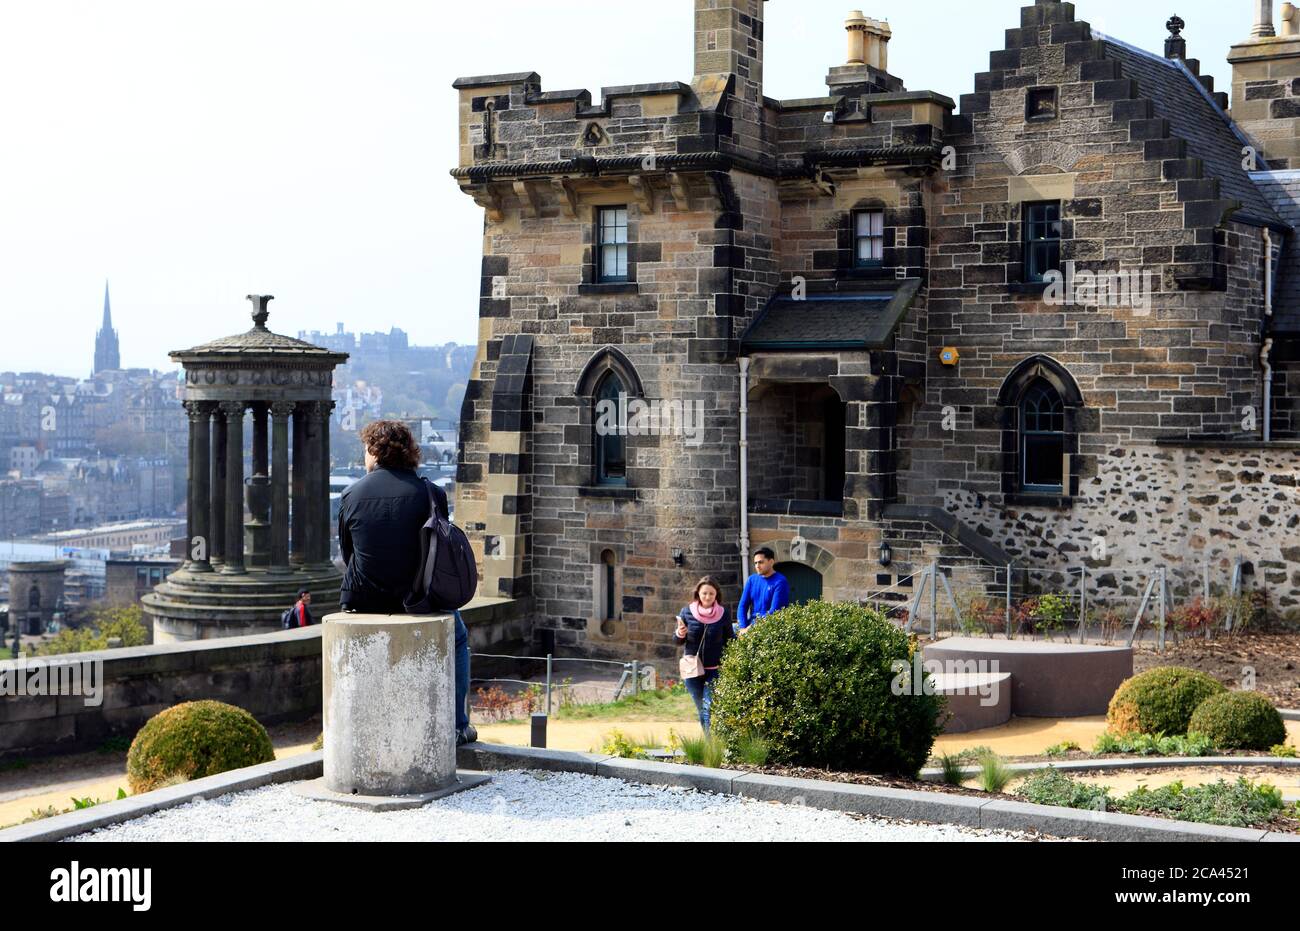 Visitors in front of Old Observatory House and the Dugald Stewart Monument on Calton Hill in Edinburgh, Scotland Stock Photo